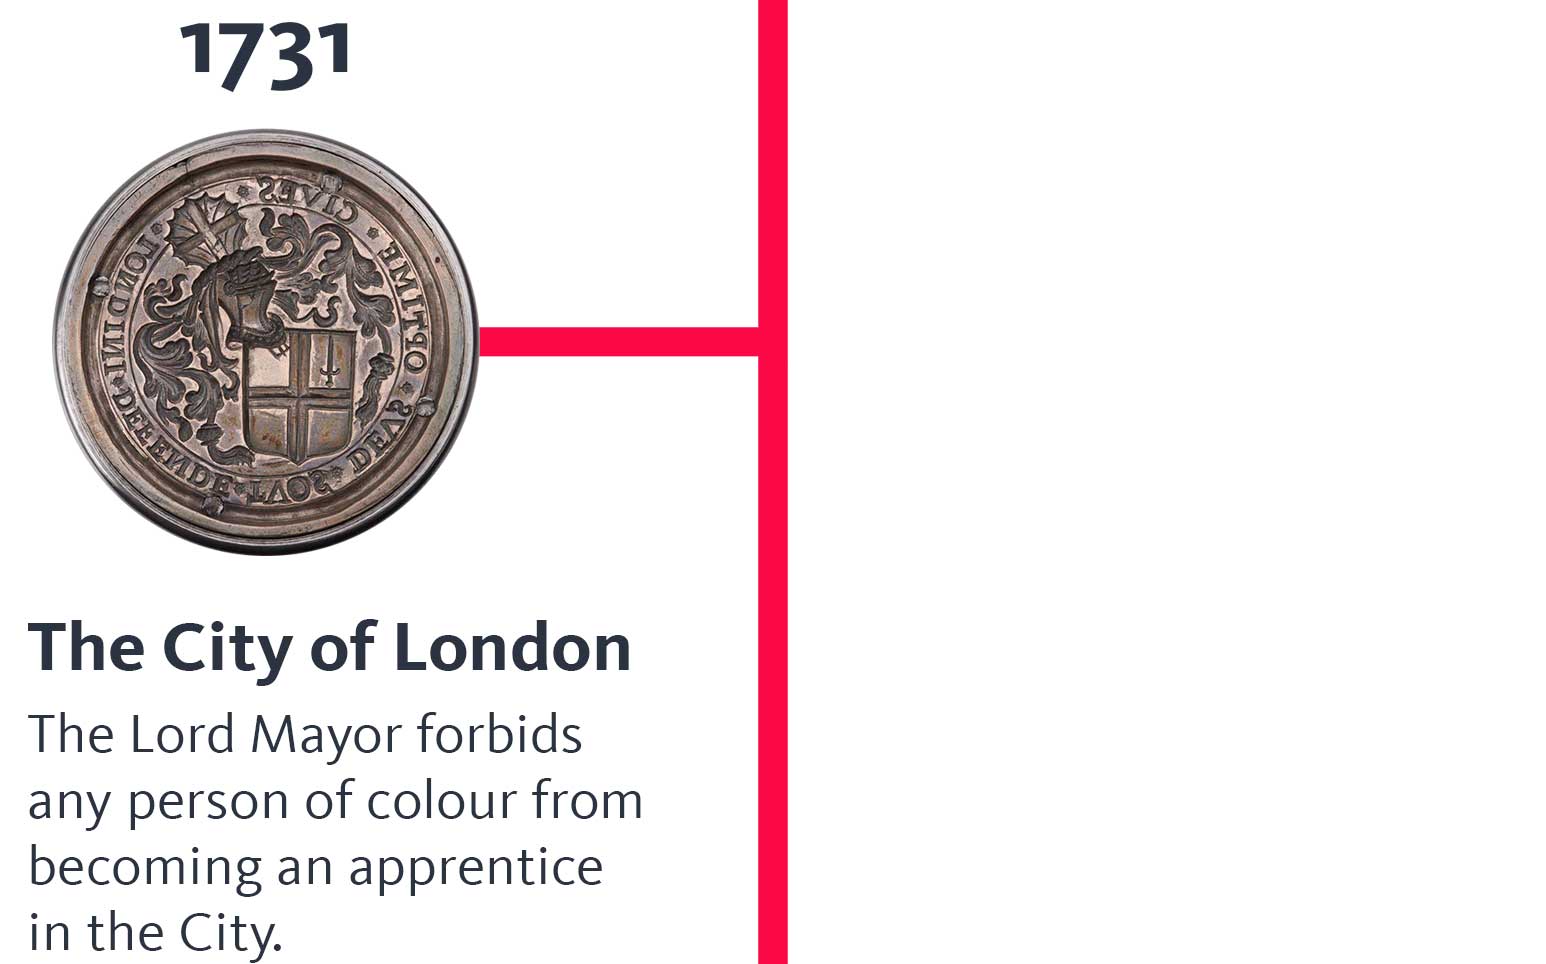 The year '1731' appears above an image of the City of London's metal seal matrix. A heading below says 'The City of London', and text below that says 'The Lord Mayor forbids any person of colour from becoming an apprentice in the City.'